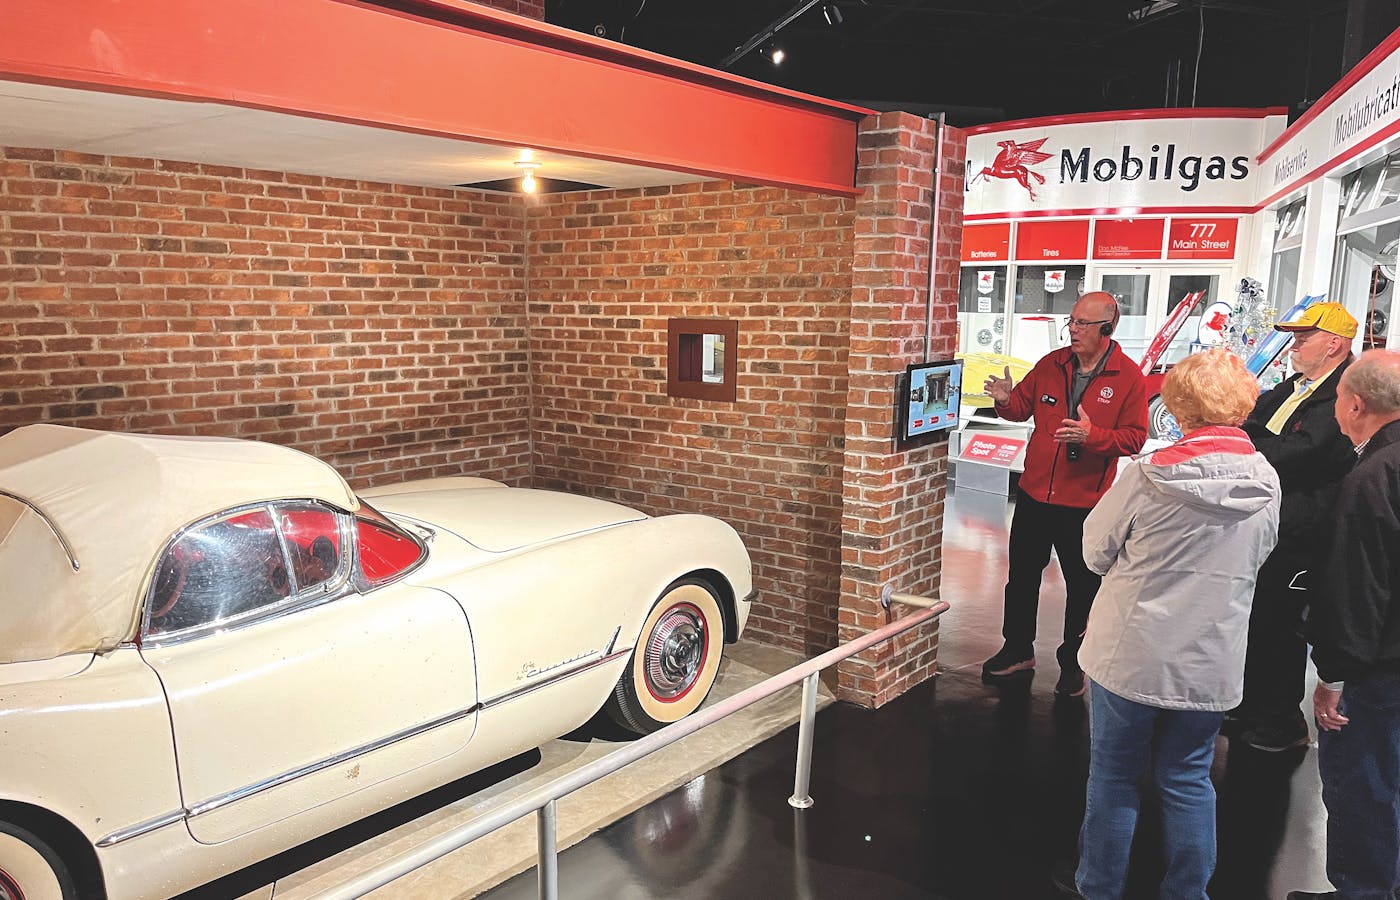 Vintage white Corvette on display at National Corvette Museum in Bowling Green, Kentucky (photo courtesy of National Corvette Museum)